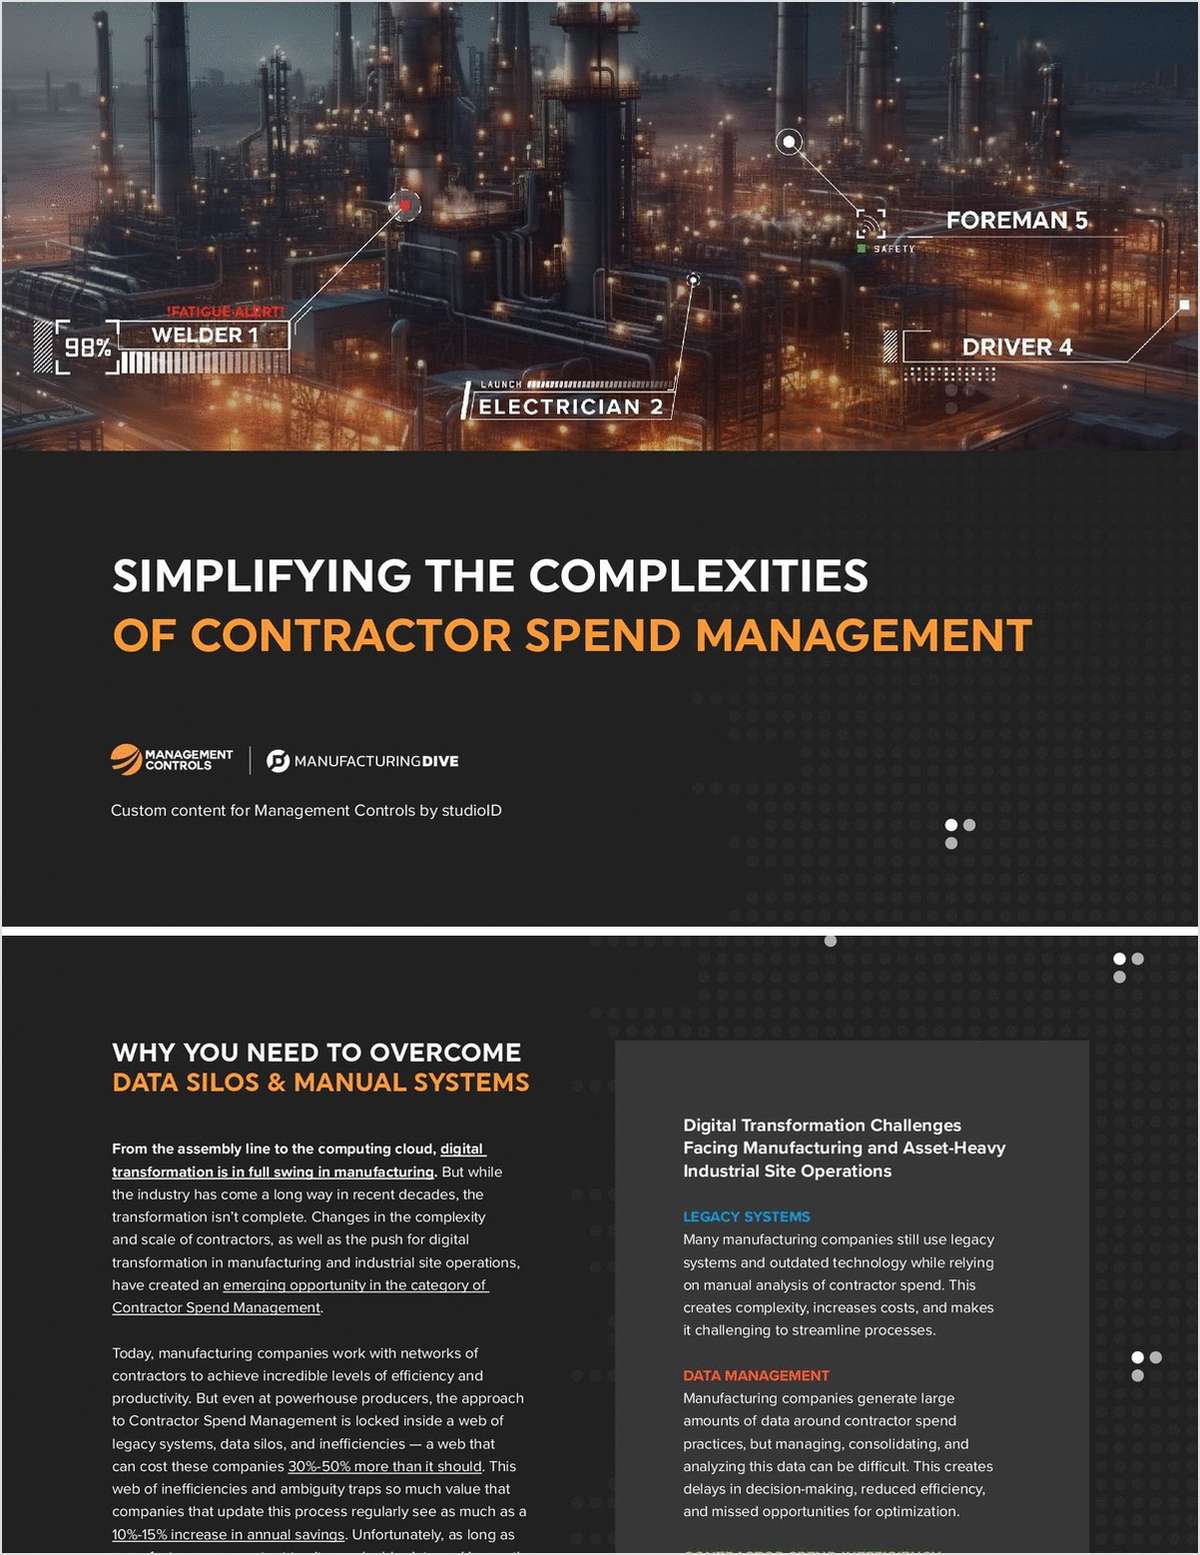 Simplifying the Complexities of Contractor Spend Management